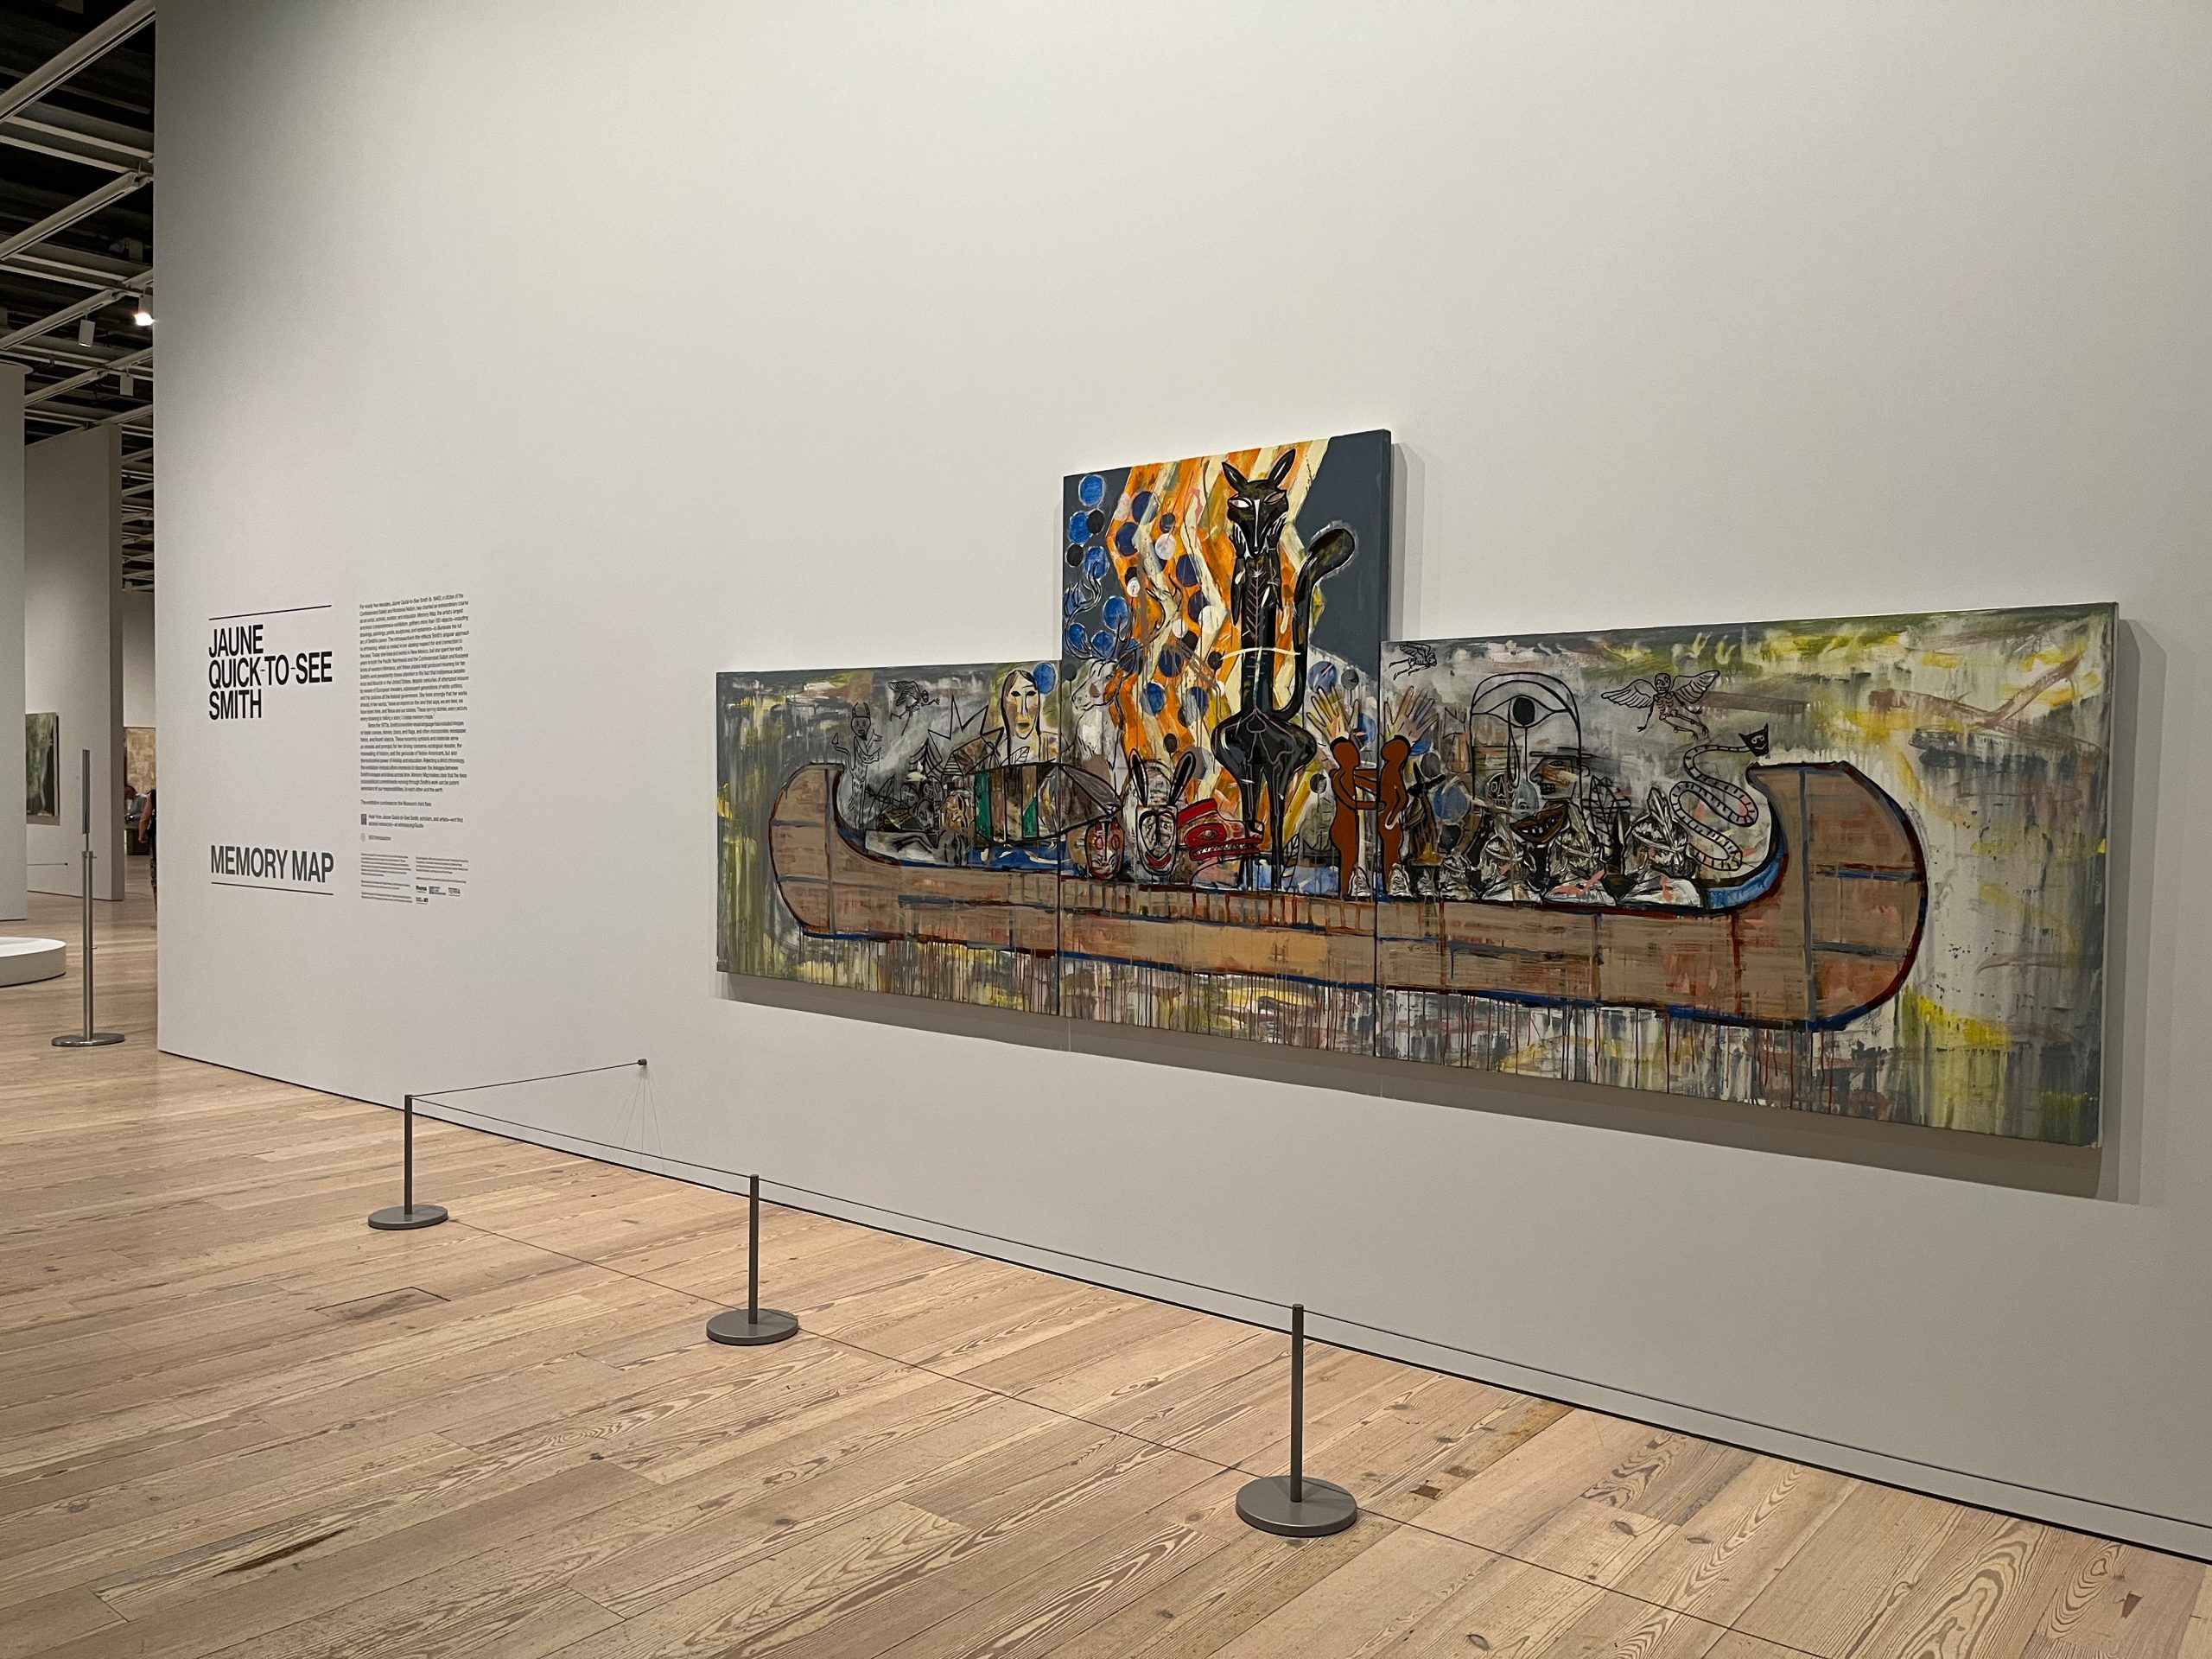 Entrance to Jaune Quick-to-See Smith exhibition, showing a diagonal gray wall in a museum interior with black text to the left and a large, colorful painting showing an abstracted canoe, piloted by a black fox in front of a bonfire.